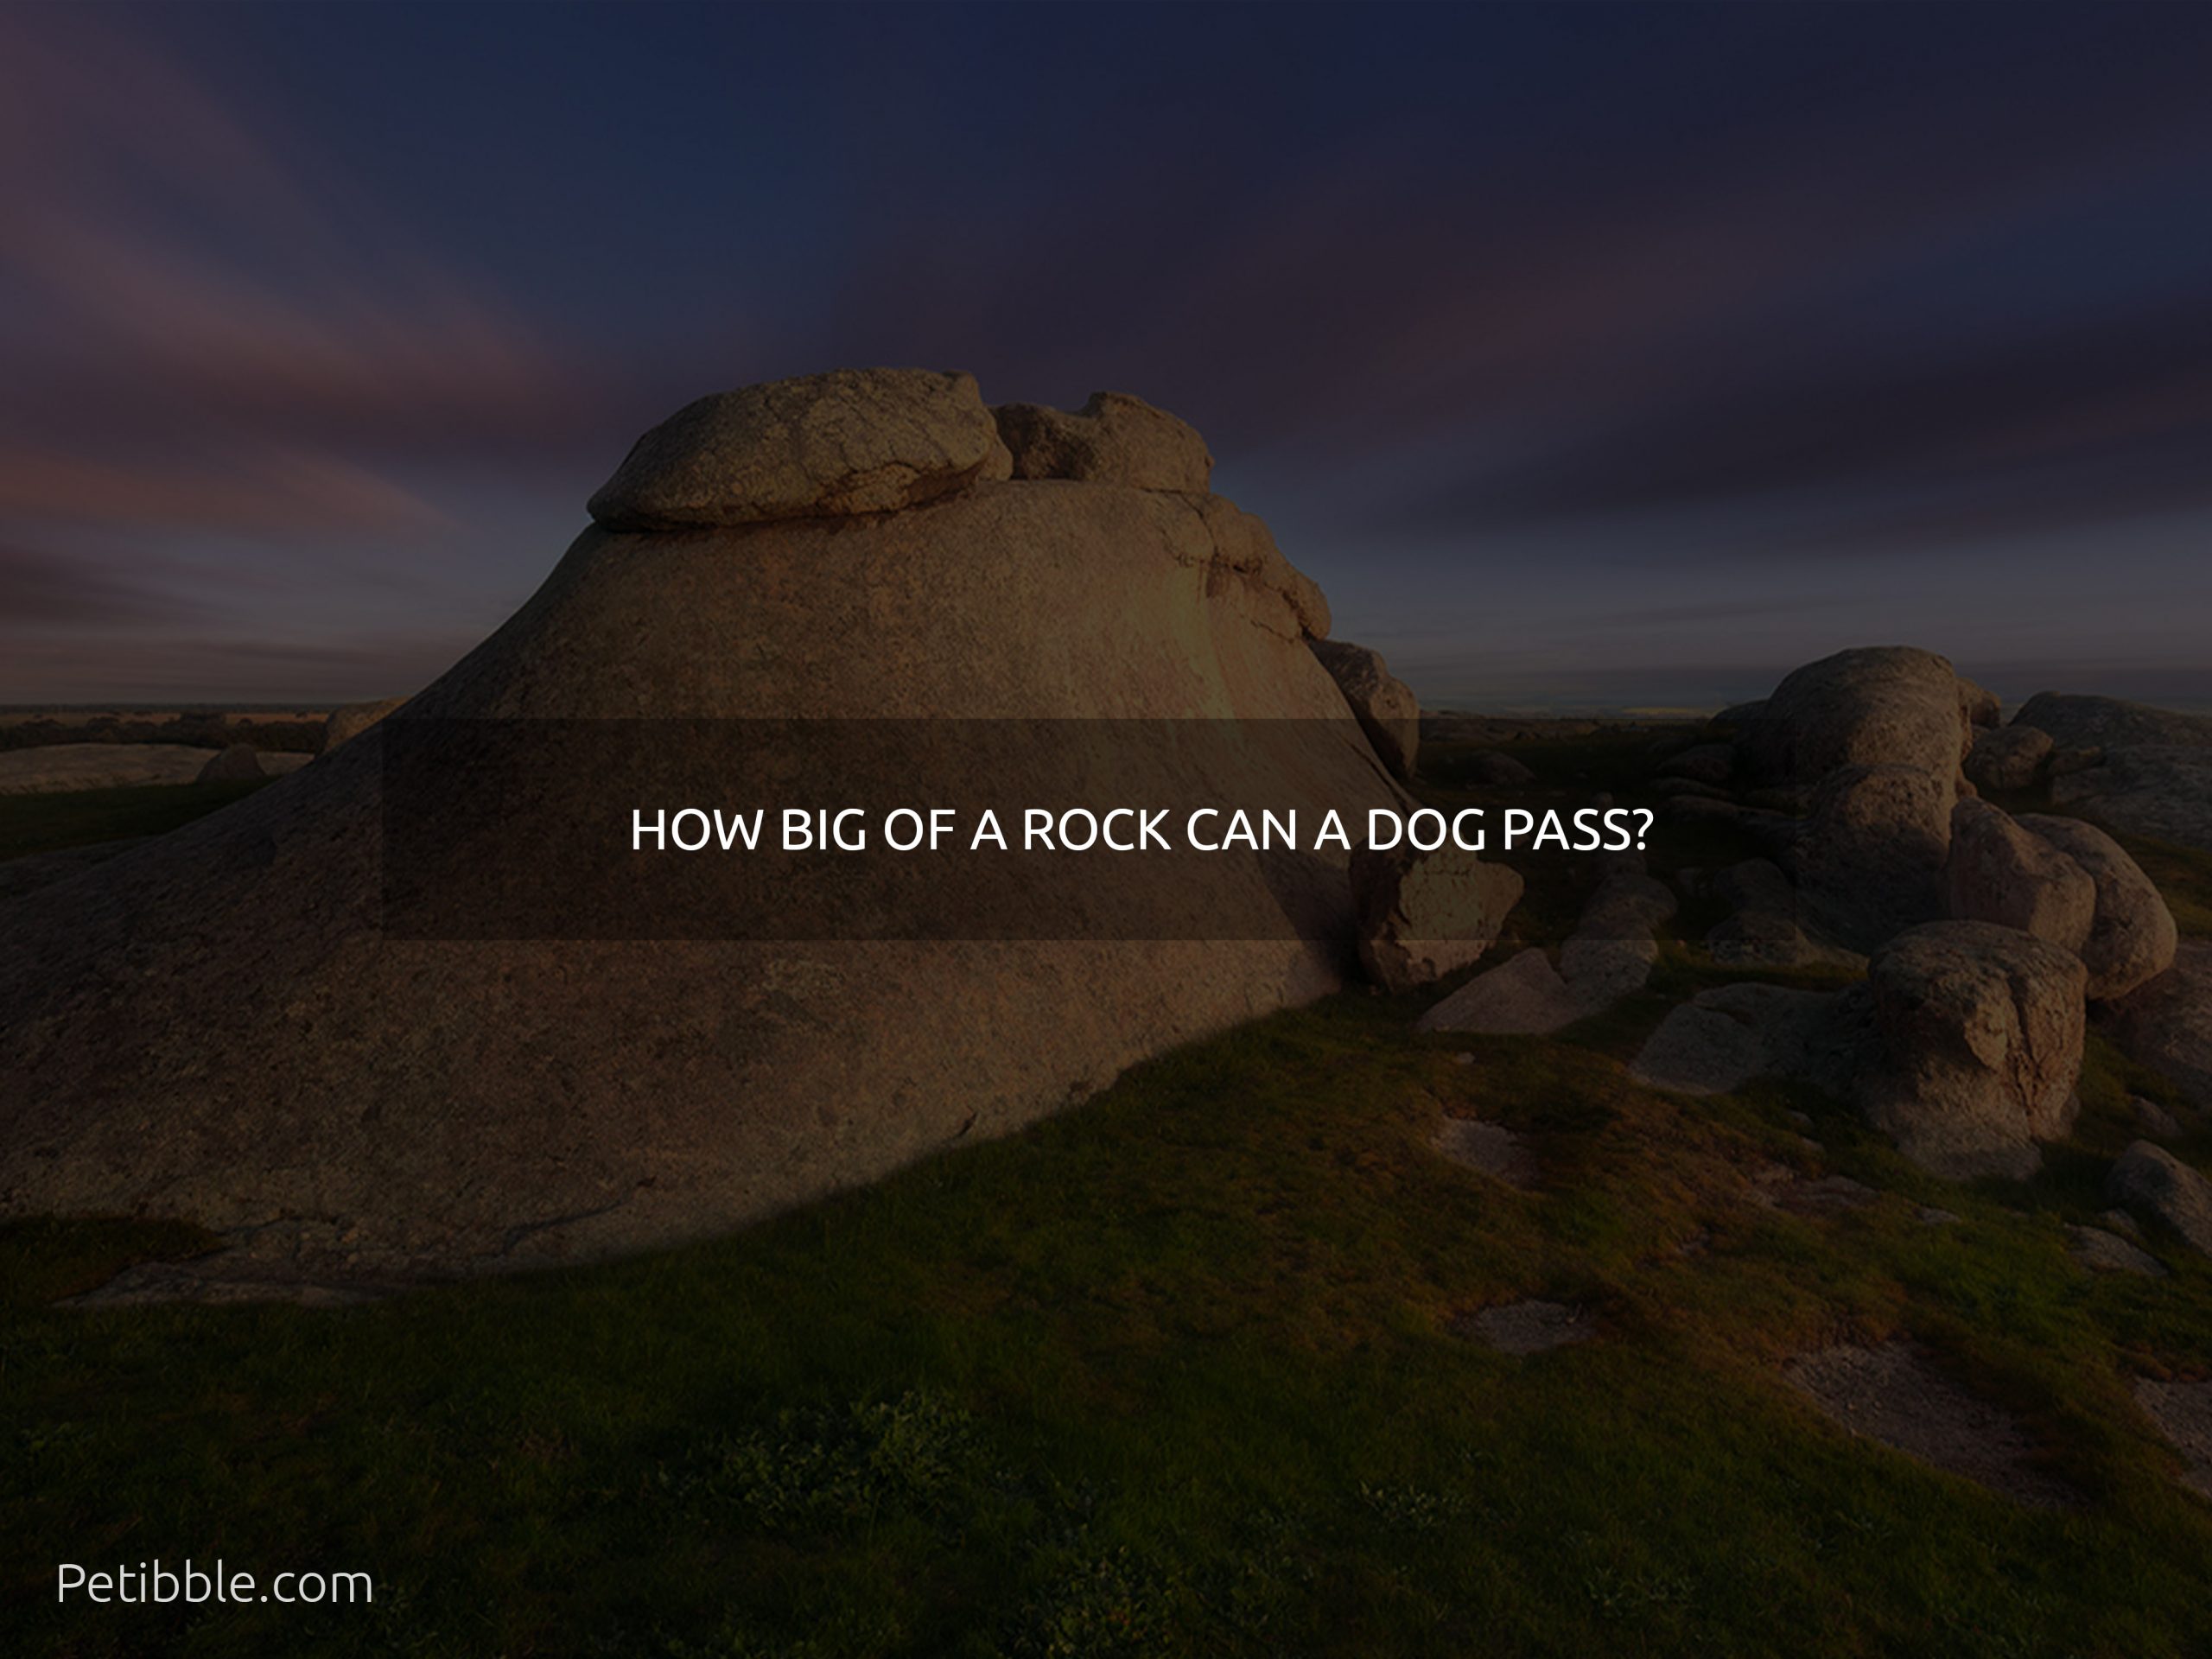 how big of a rock can a dog pass?